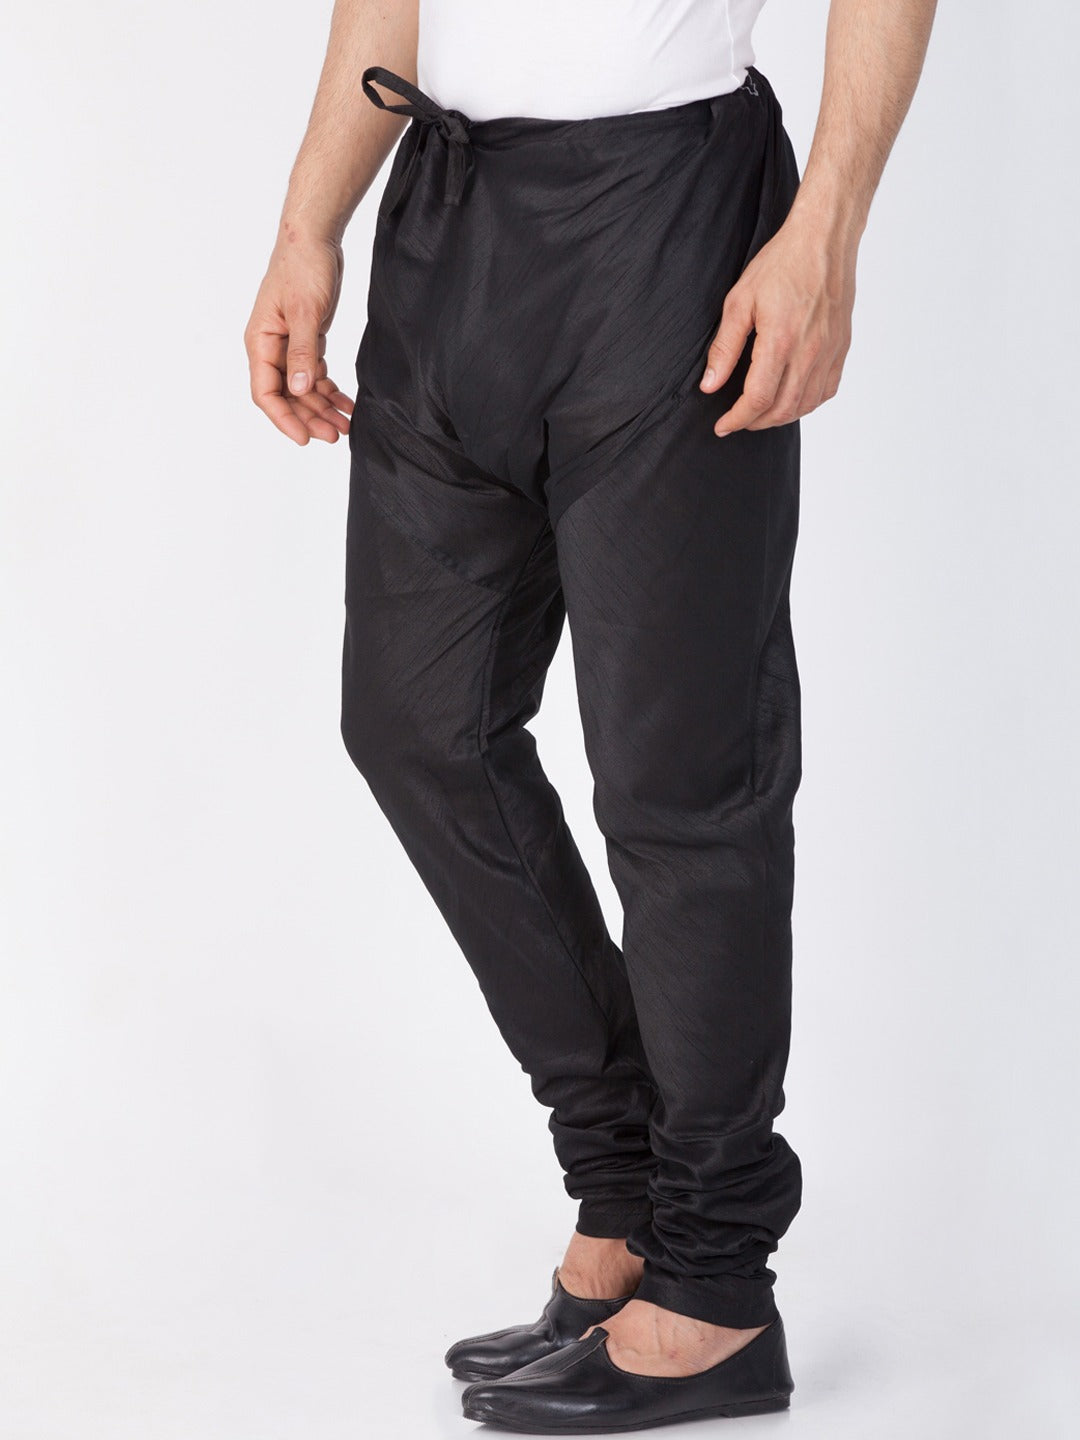 Black Solid Pajamas Indian Clothing in Denver, CO, Aurora, CO, Boulder, CO, Fort Collins, CO, Colorado Springs, CO, Parker, CO, Highlands Ranch, CO, Cherry Creek, CO, Centennial, CO, and Longmont, CO. NATIONWIDE SHIPPING USA- India Fashion X